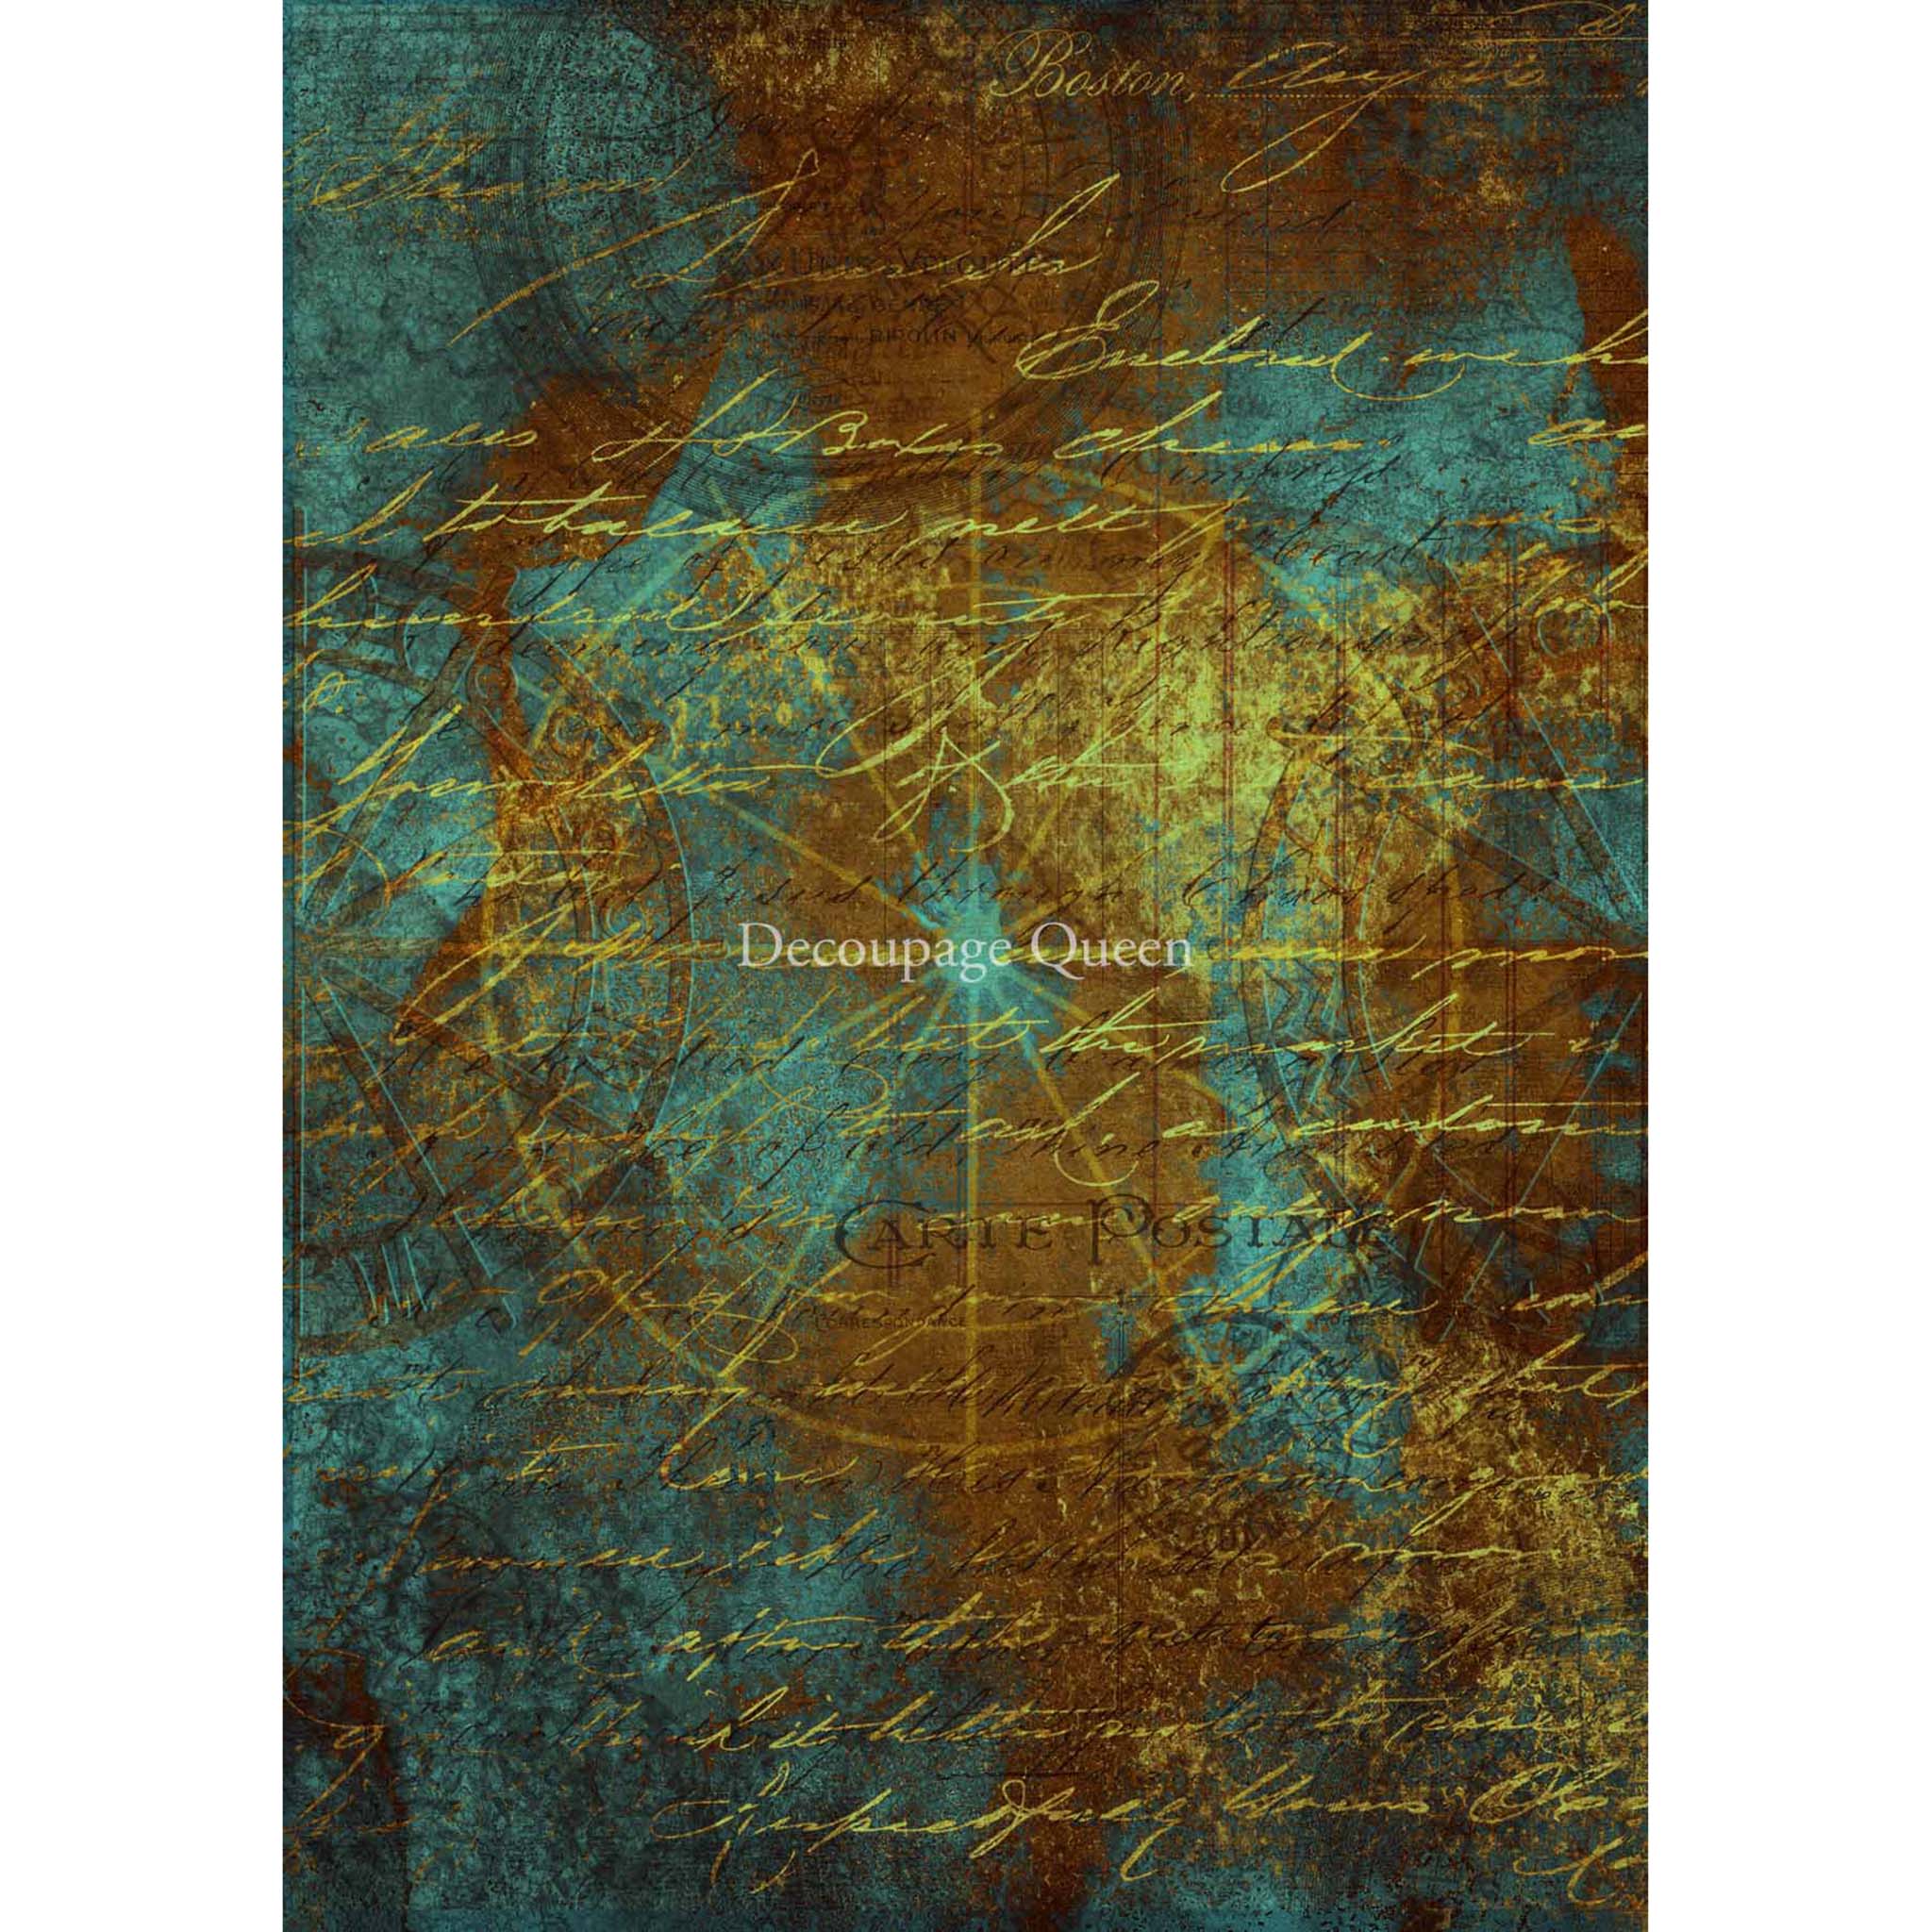 Rice paper design that features gold colored script writing over a teal and copper background. White borders are on the sides.